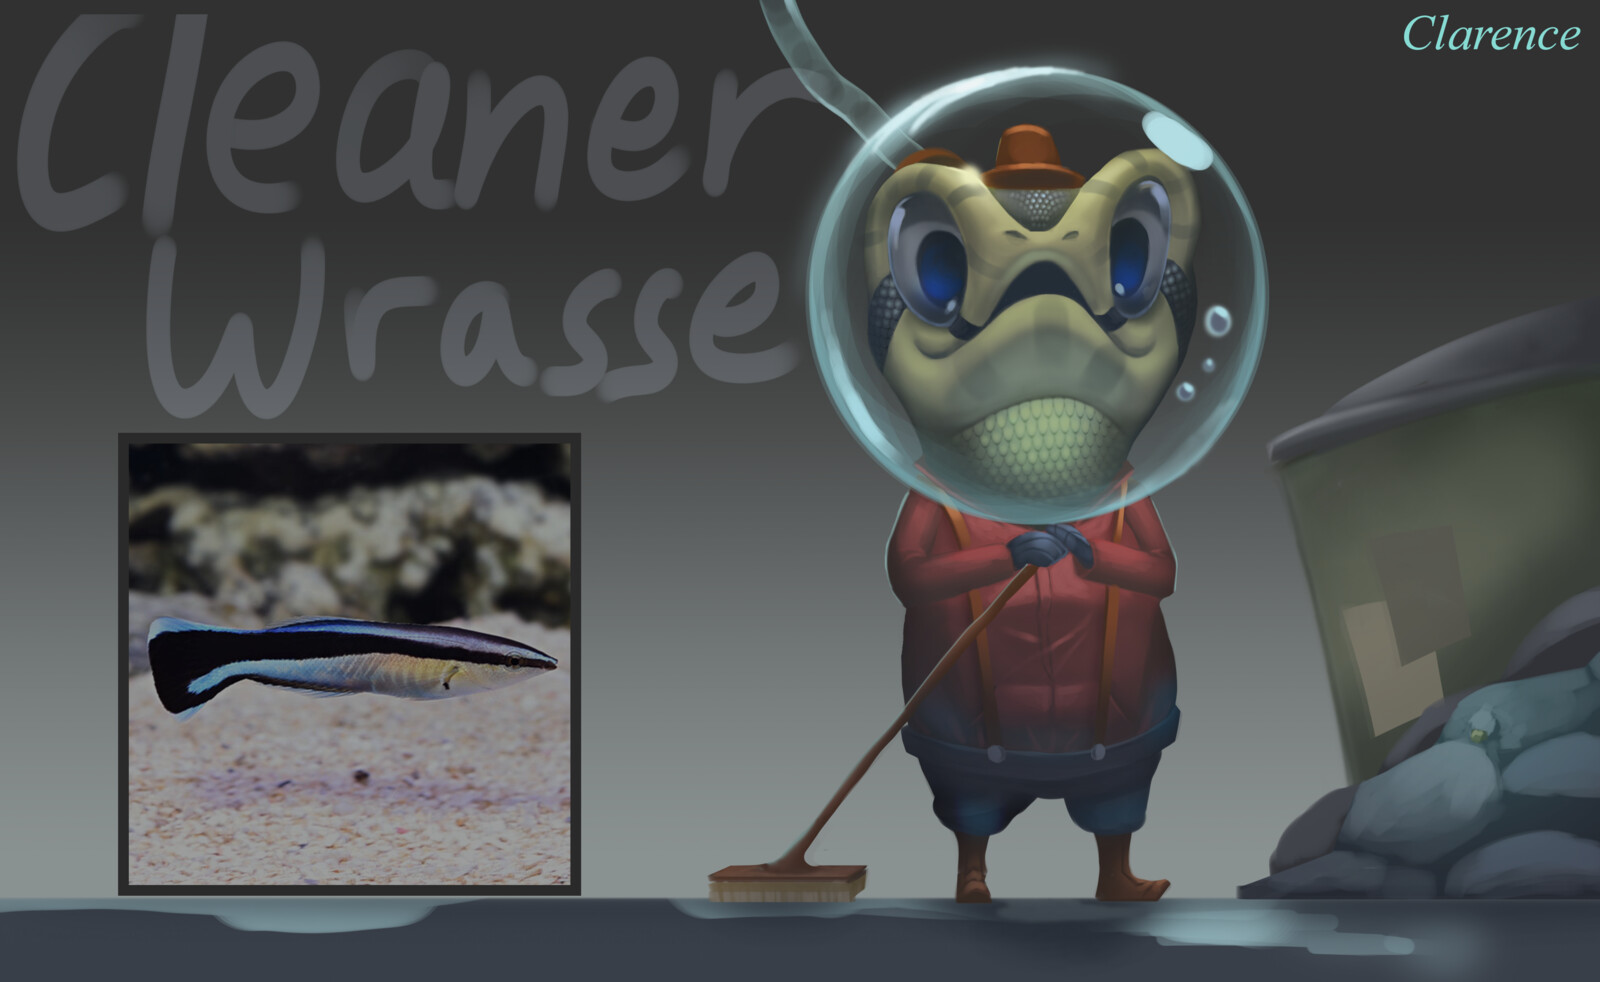 Clarence: Cleaner Wrasse inspired Design